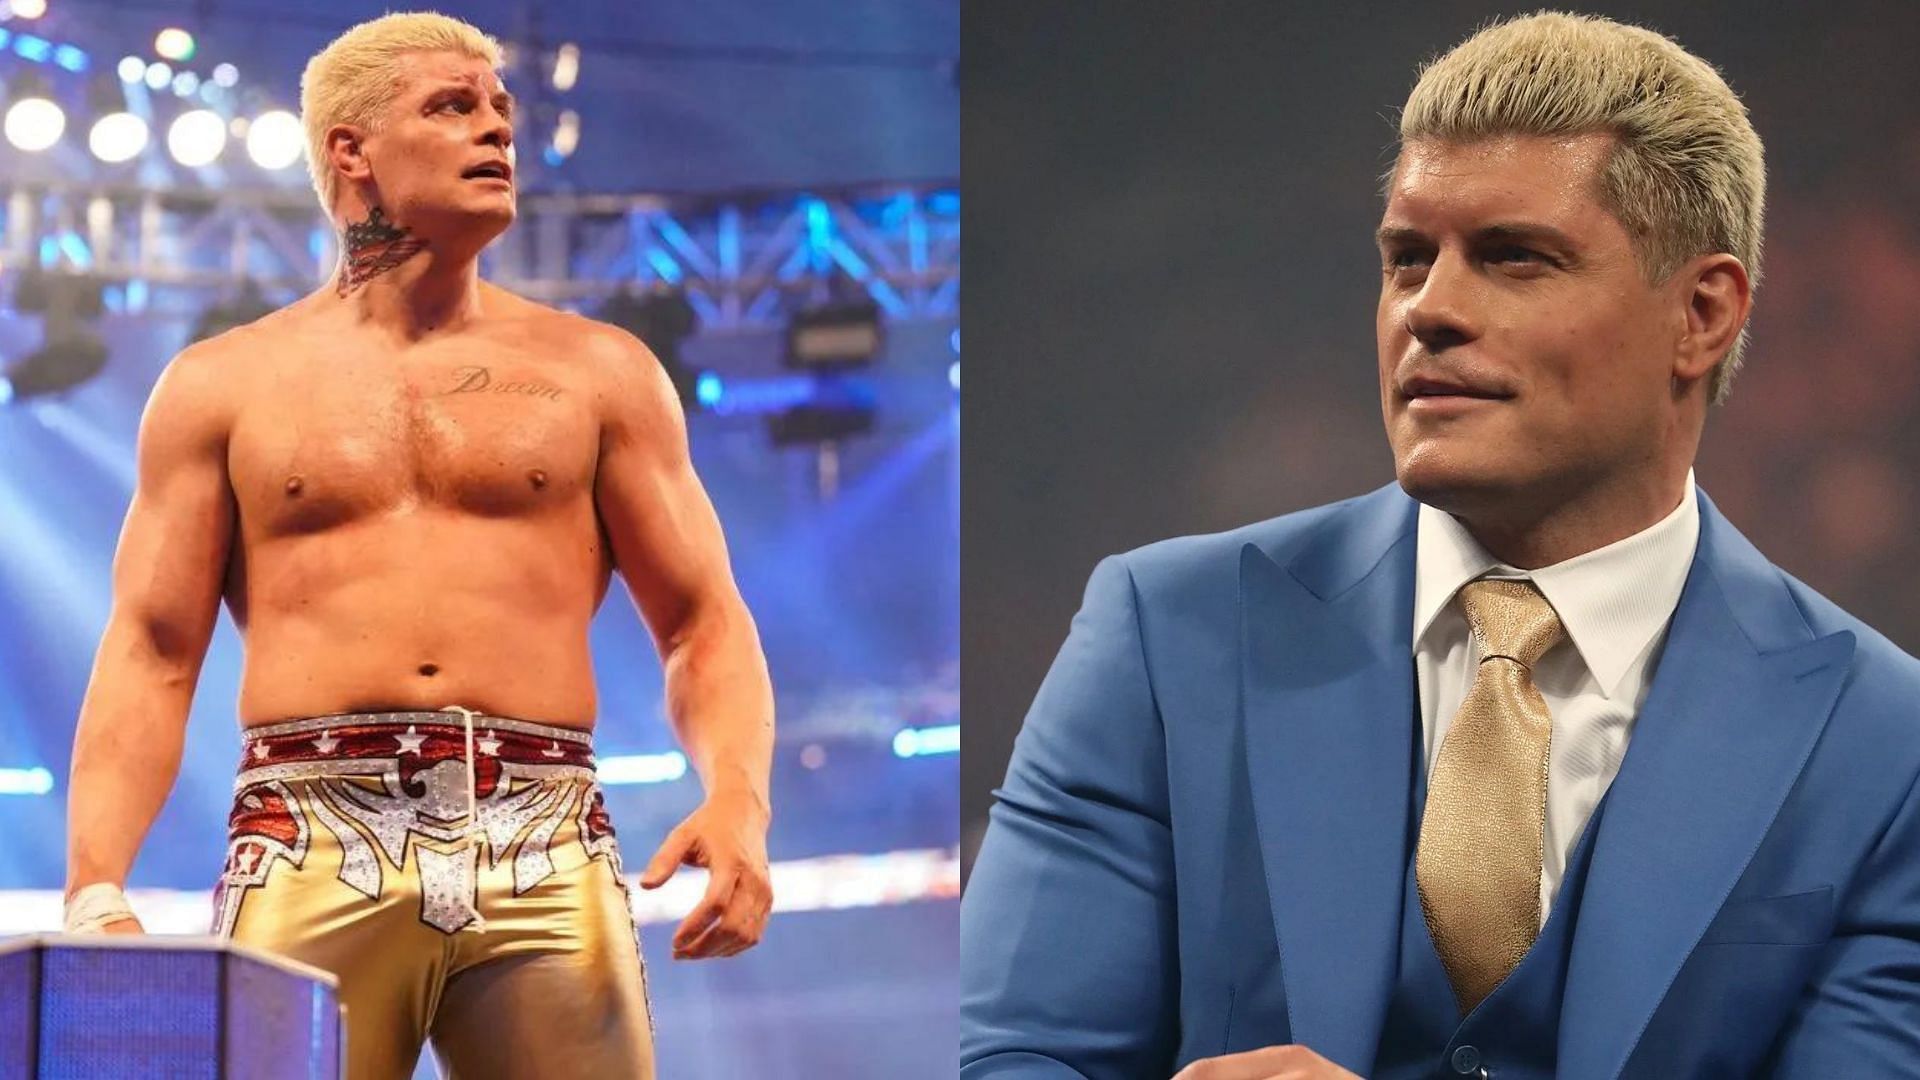 Who will Cody Rhodes feud with after returning to WWE?